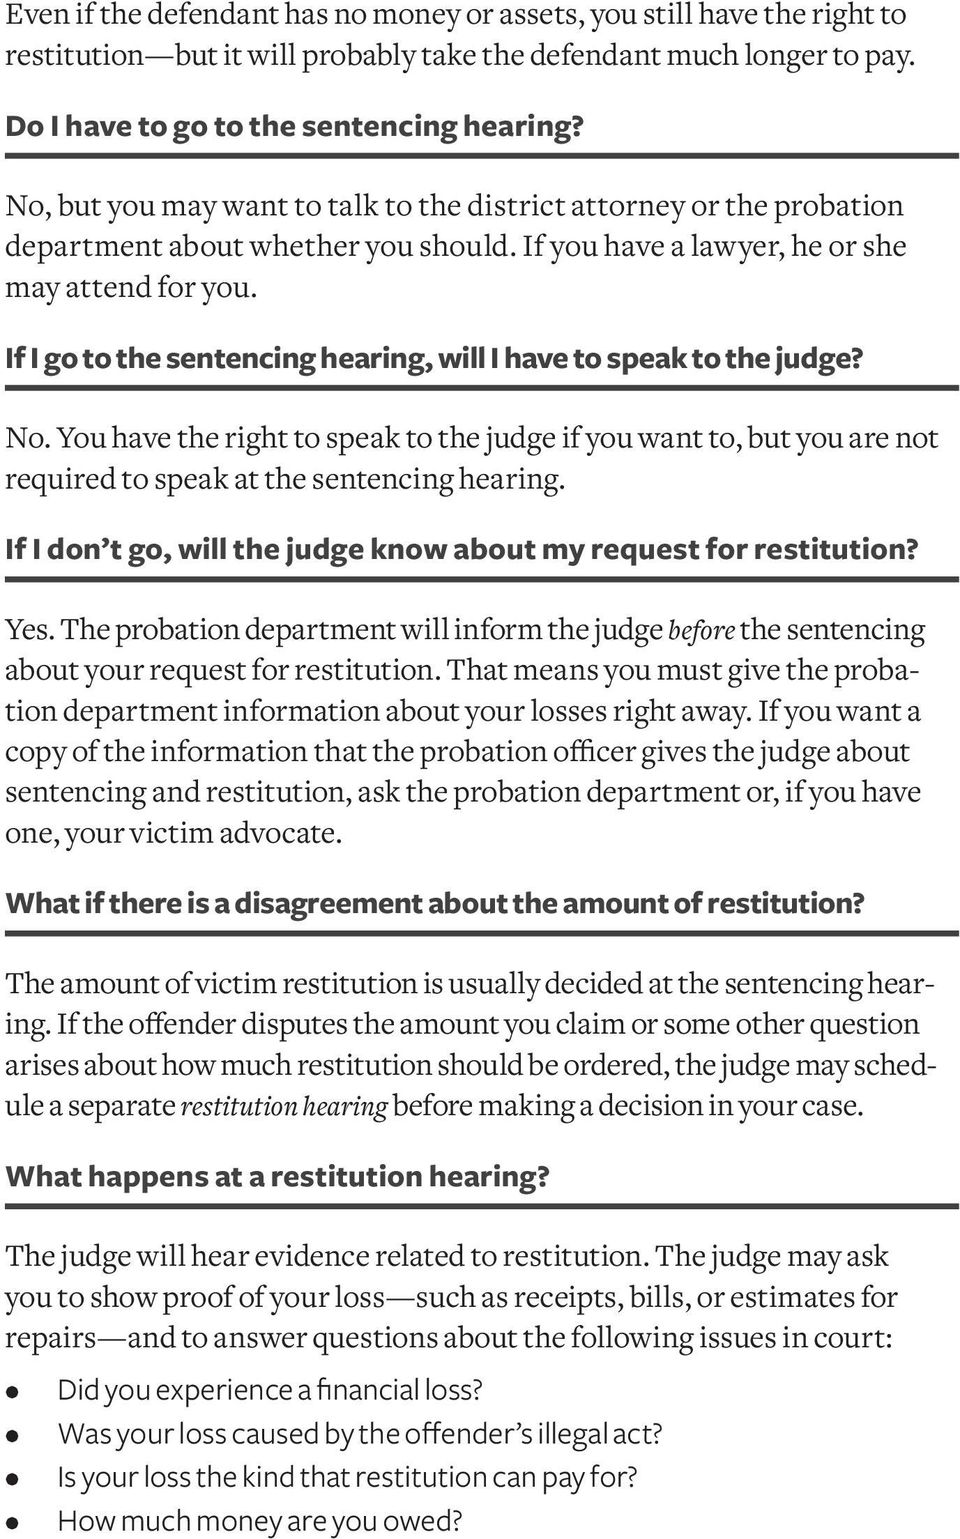 If I go to the sentencing hearing, will I have to speak to the judge? No. You have the right to speak to the judge if you want to, but you are not required to speak at the sentencing hearing.